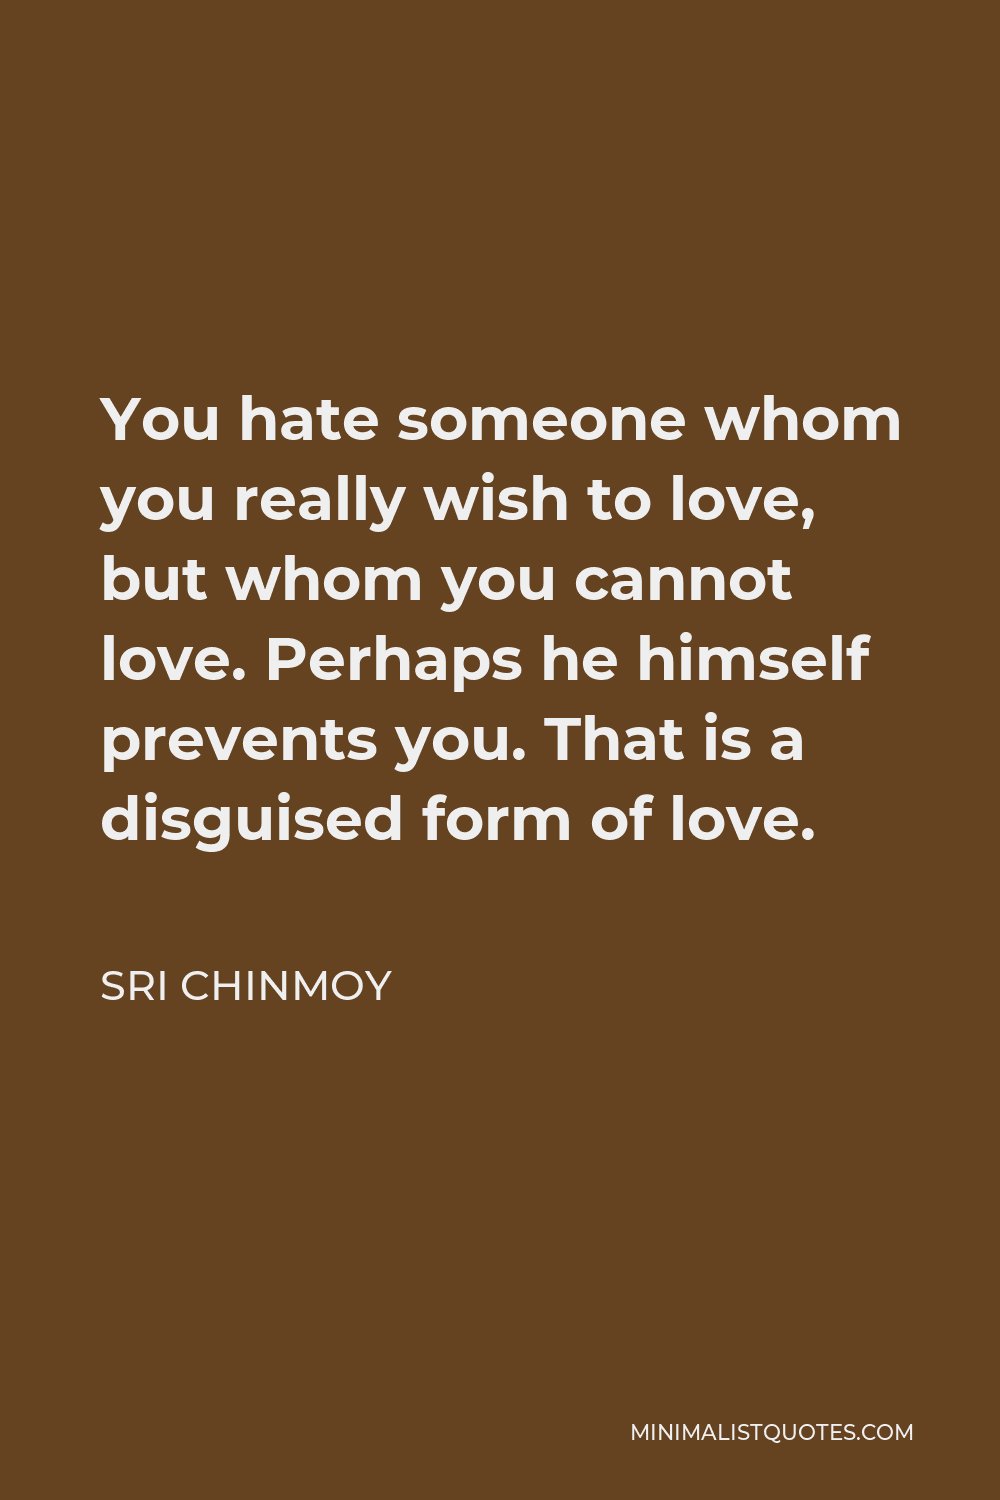 Sri Chinmoy Quote - You hate someone whom you really wish to love, but whom you cannot love. Perhaps he himself prevents you. That is a disguised form of love.